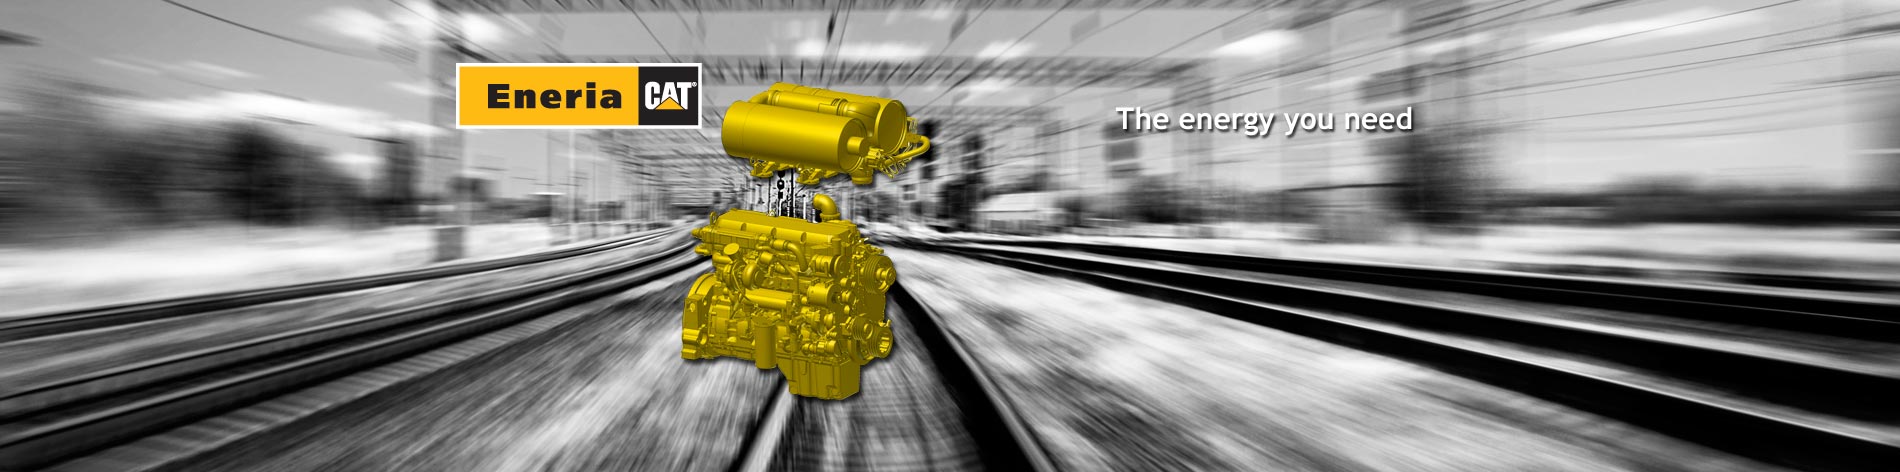 We offer you a wide range of Caterpillar diesel engines in many different versions designed for industrial or railway applications.